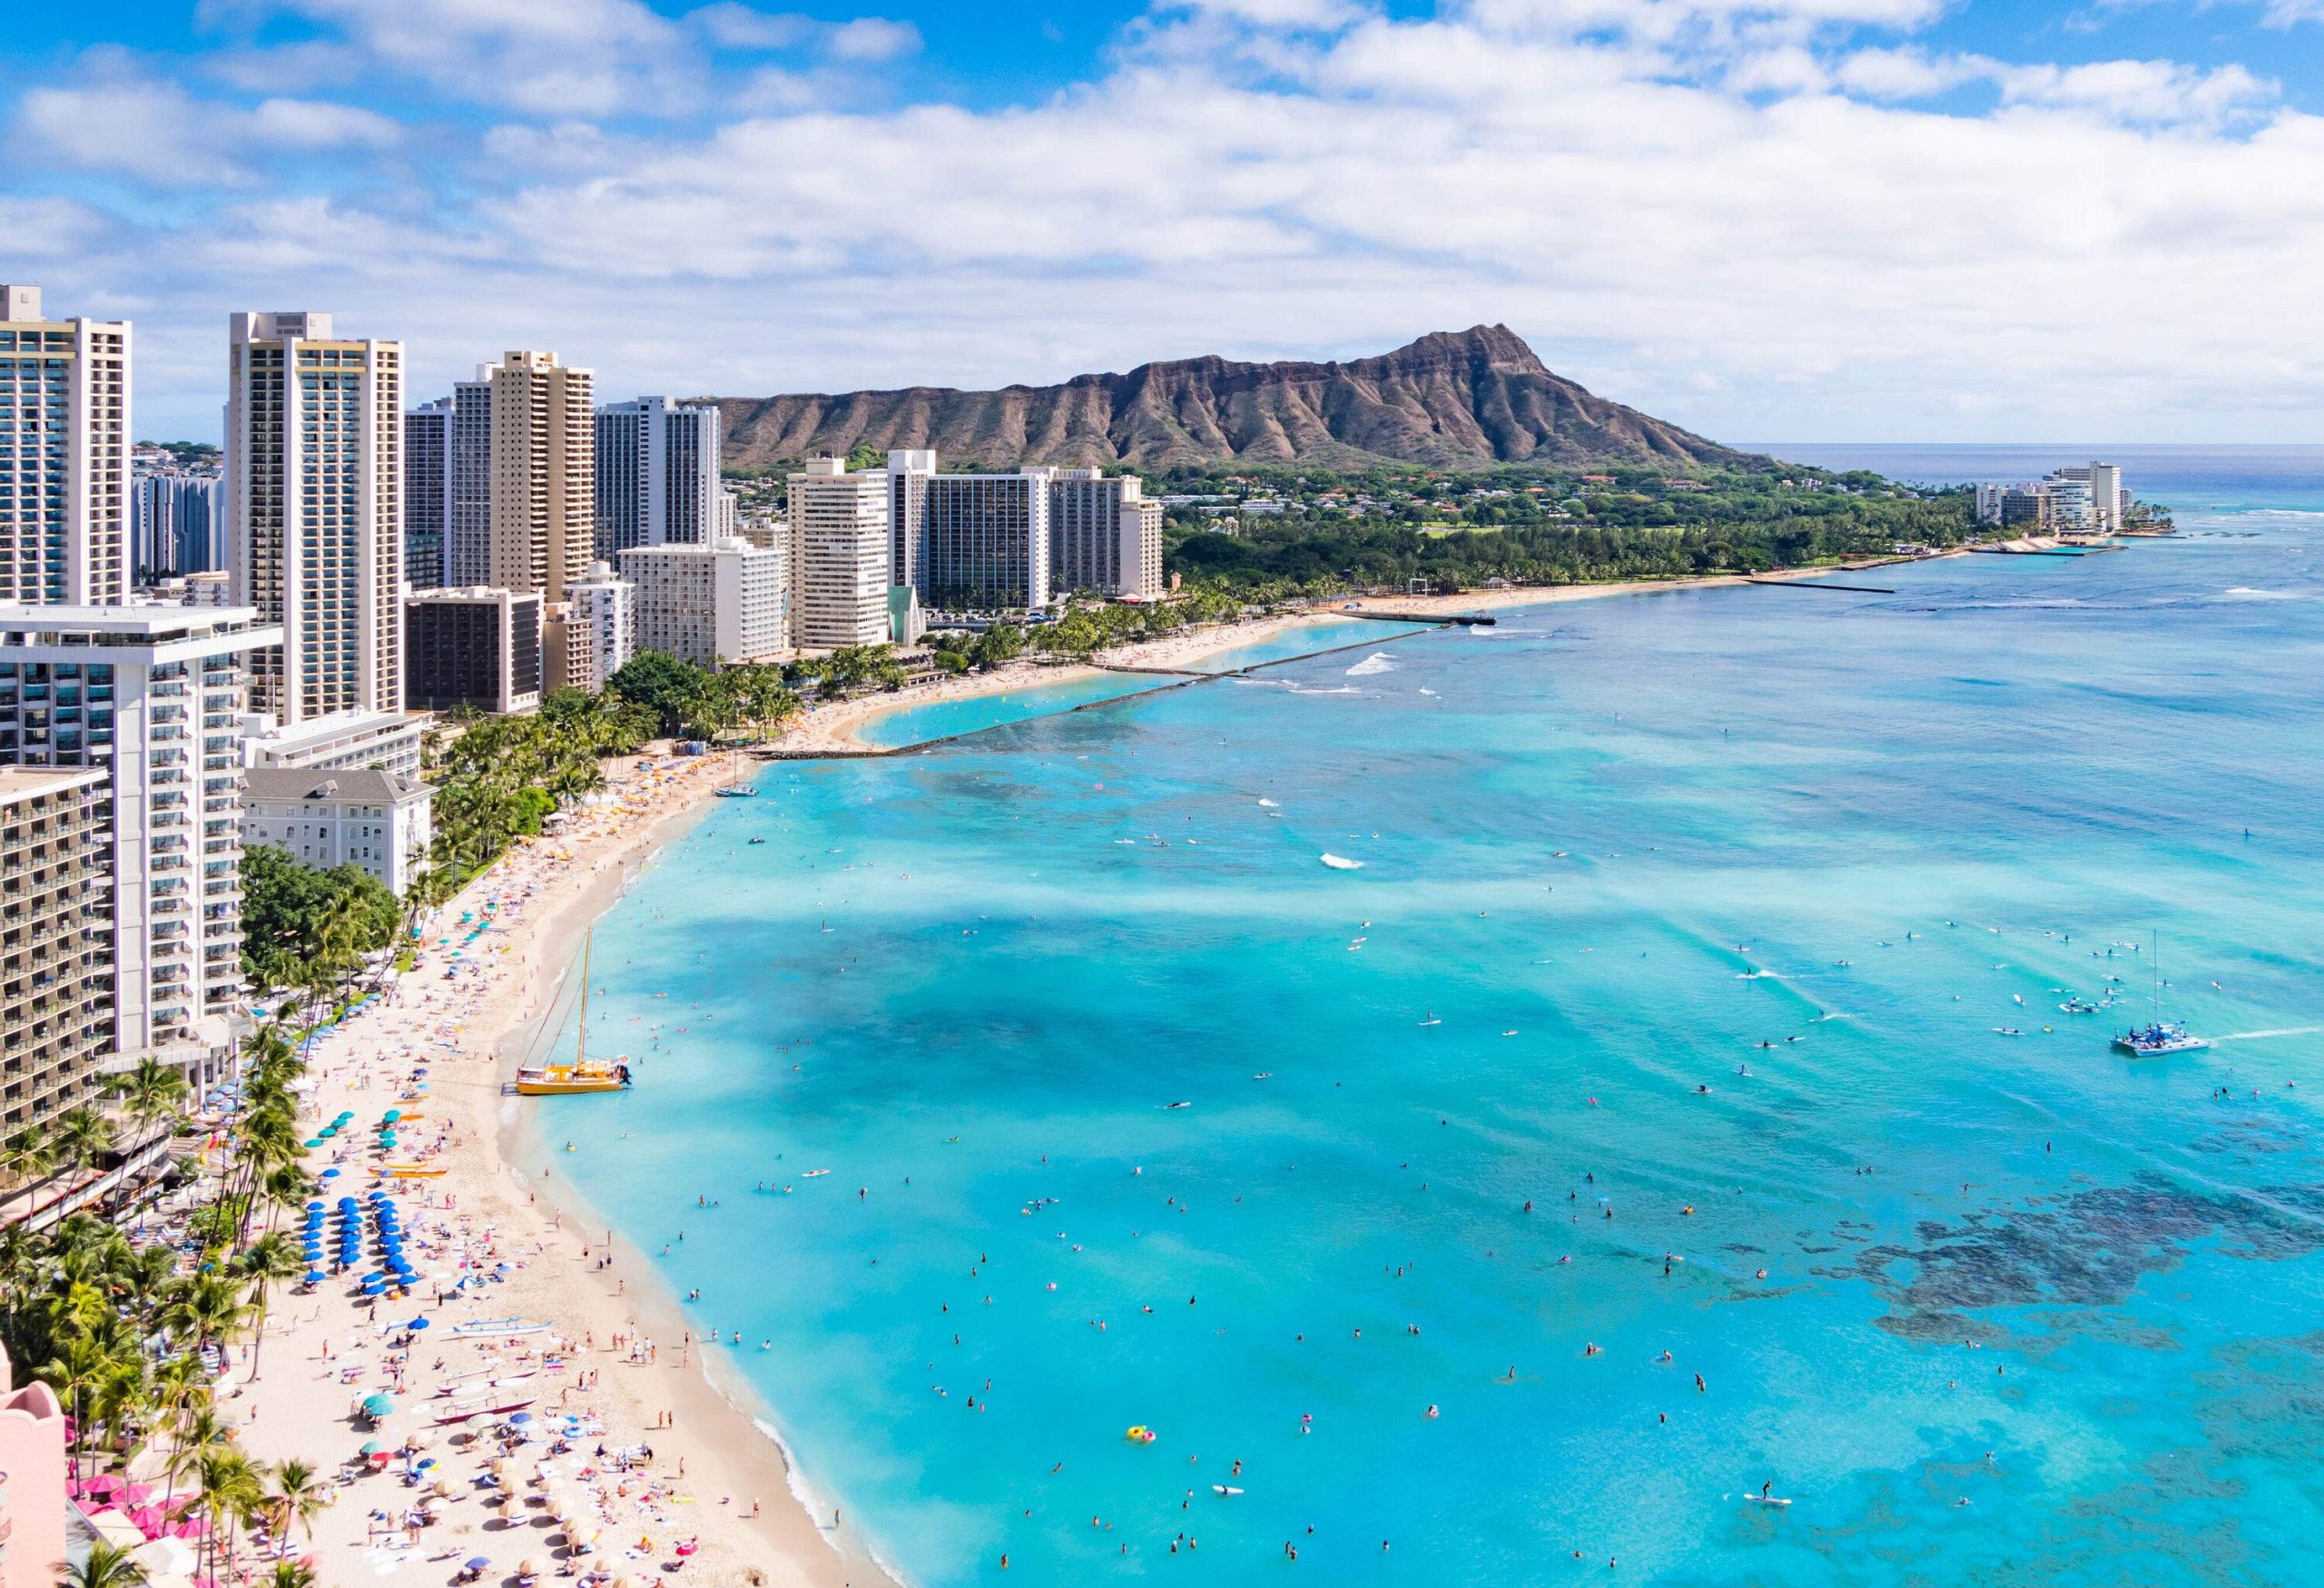 Waikiki Beach, adorned with hotels and buildings, stretches along the coastline, with the iconic Diamond Head Crater majestically rising in the distance.